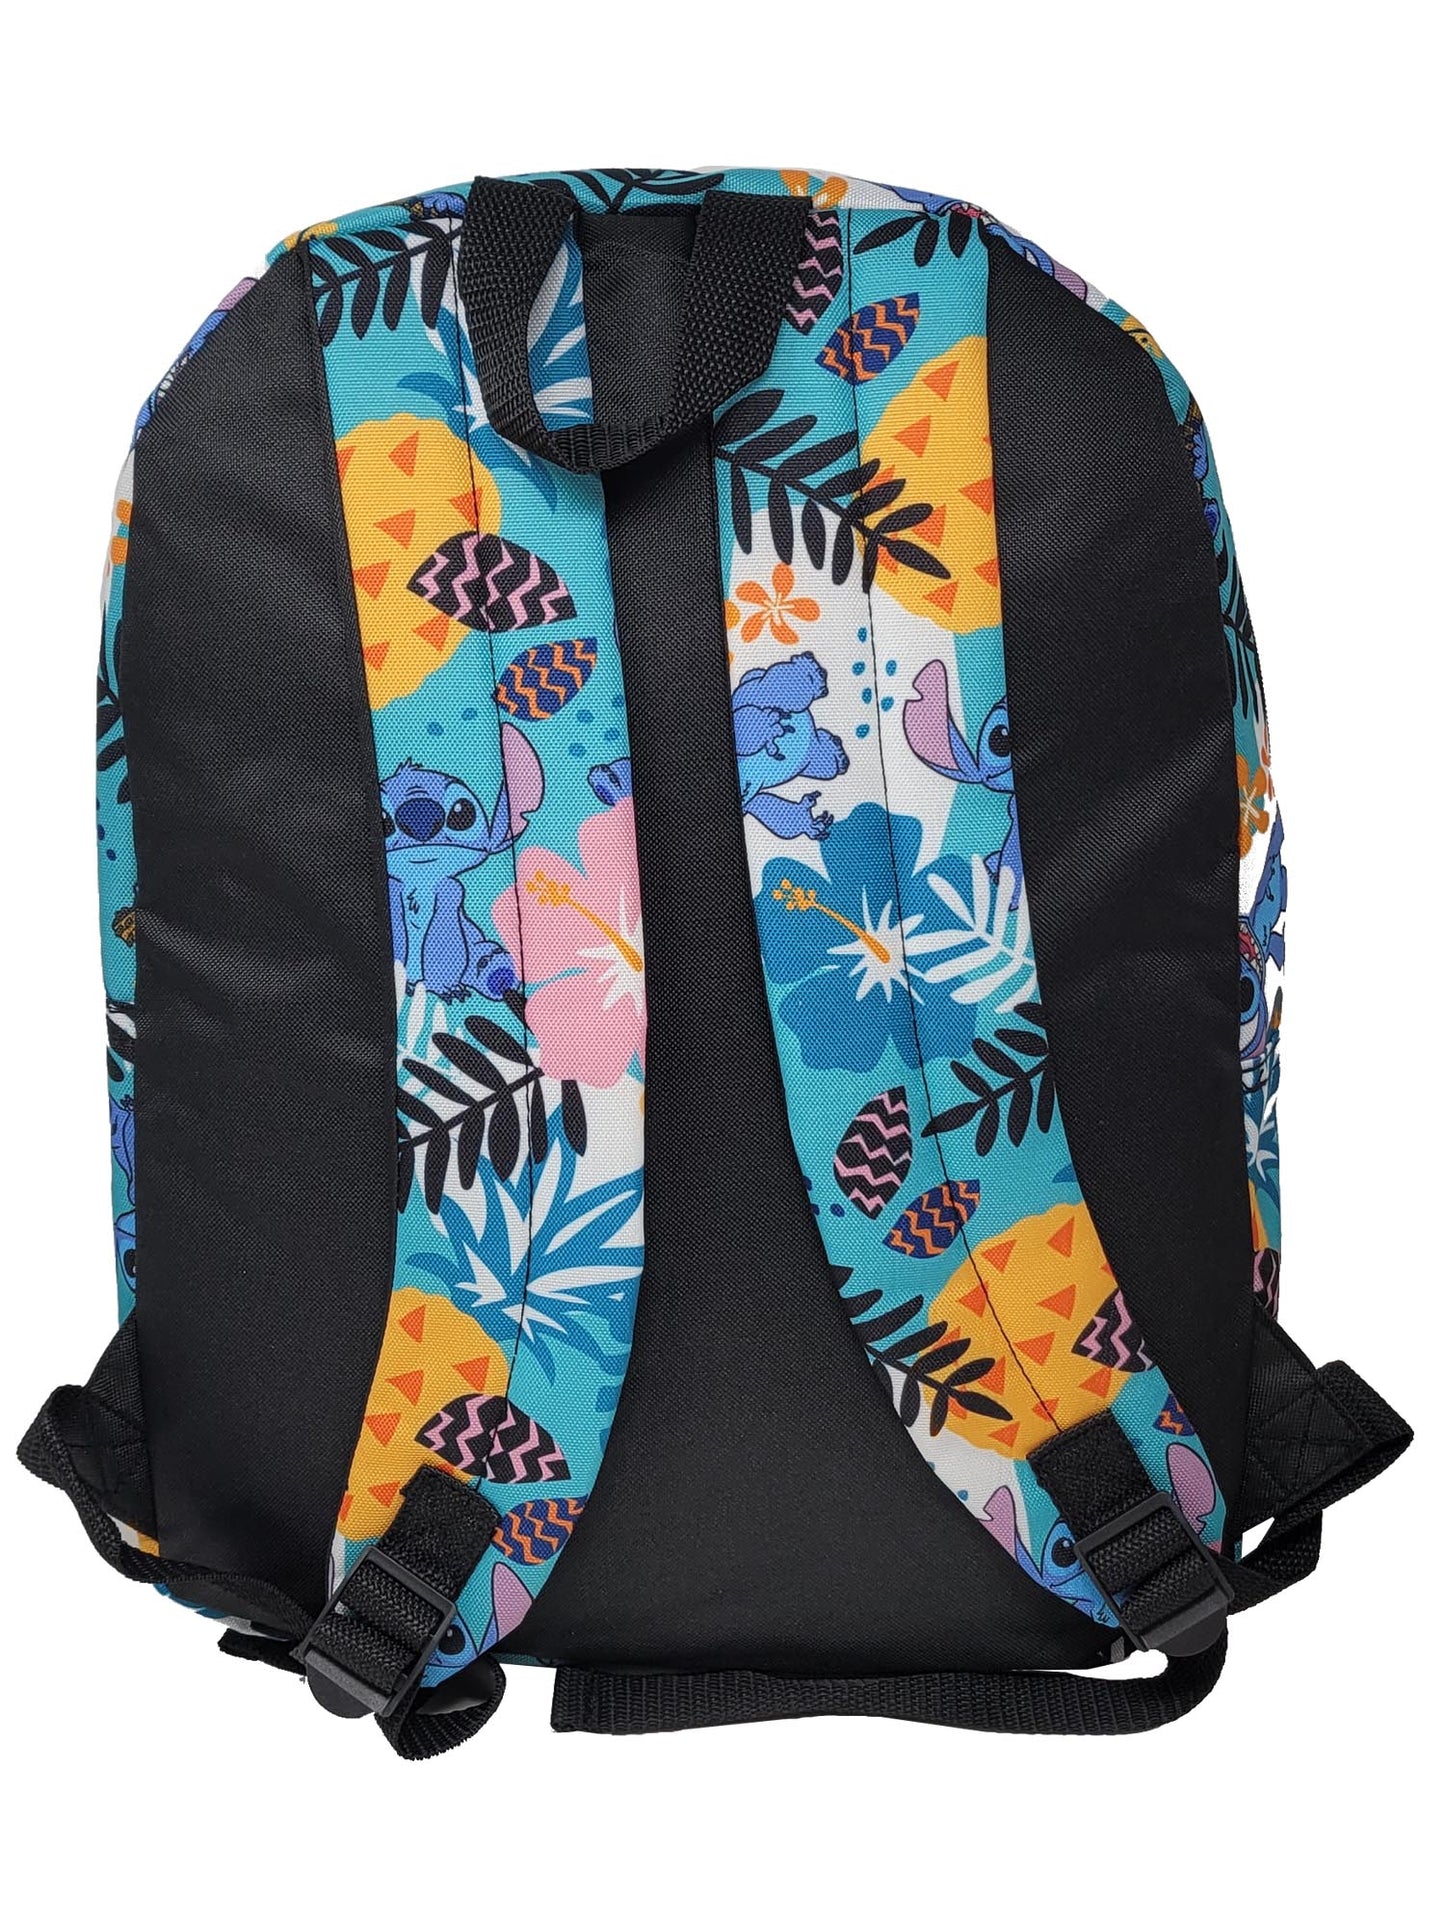 Lilo & Stitch 16" Backpack All-Over Print Flowers Pineapples w/ Front Pocket